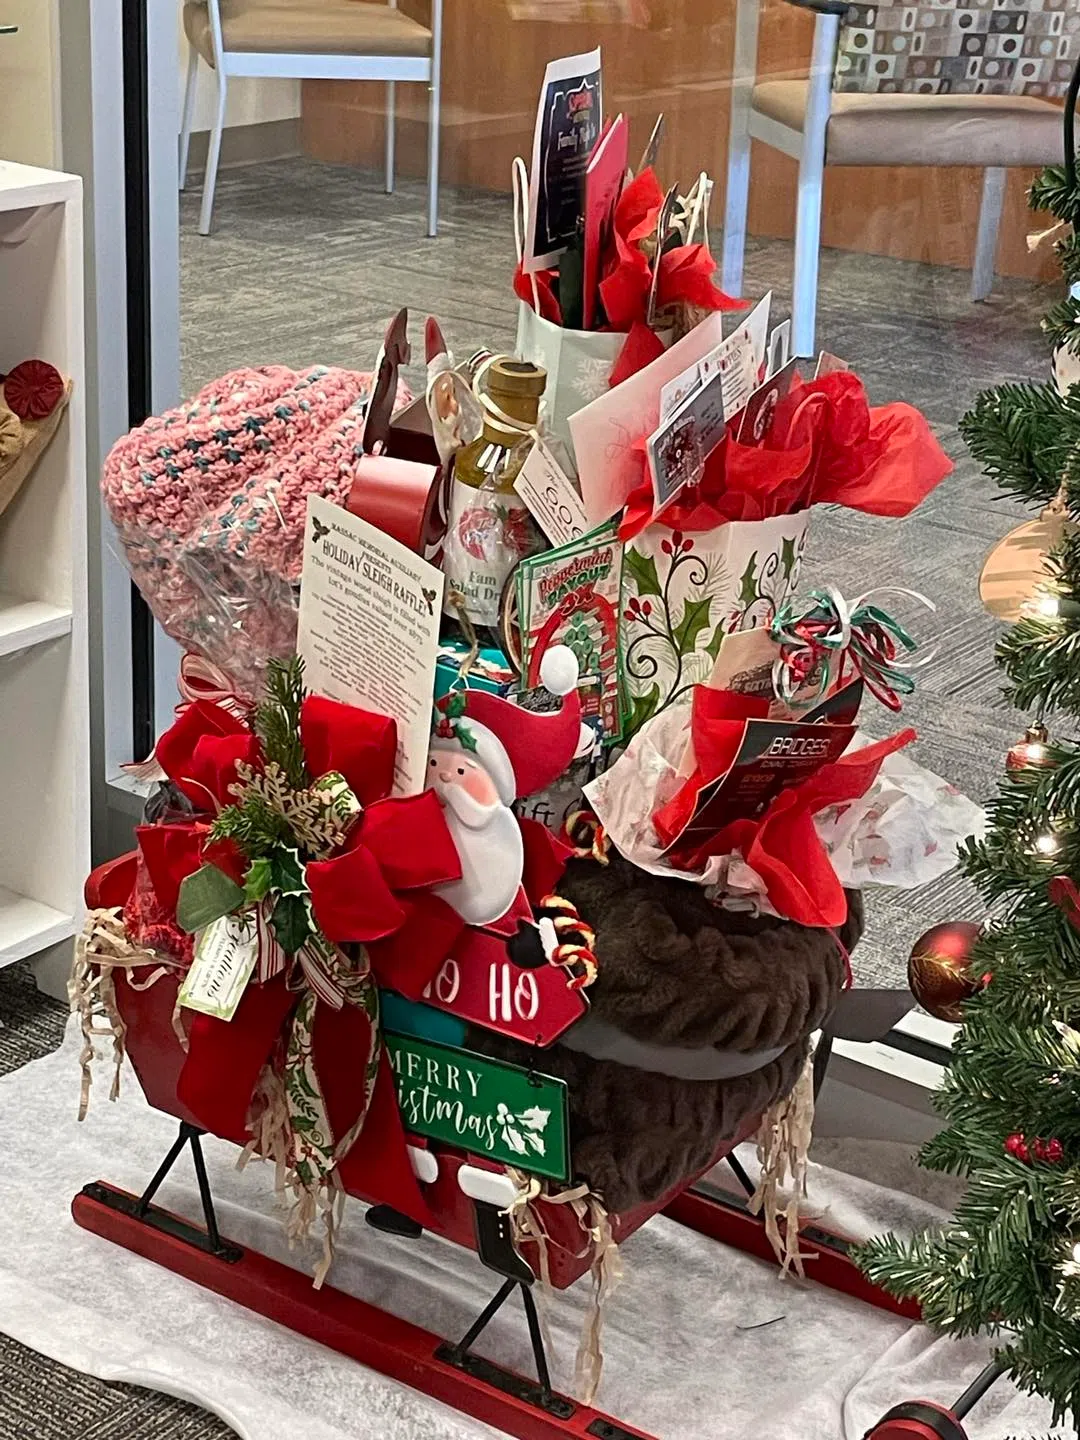 Massac Memorial Hospital Auxiliary Holiday Sleigh Giveaway Sunday!